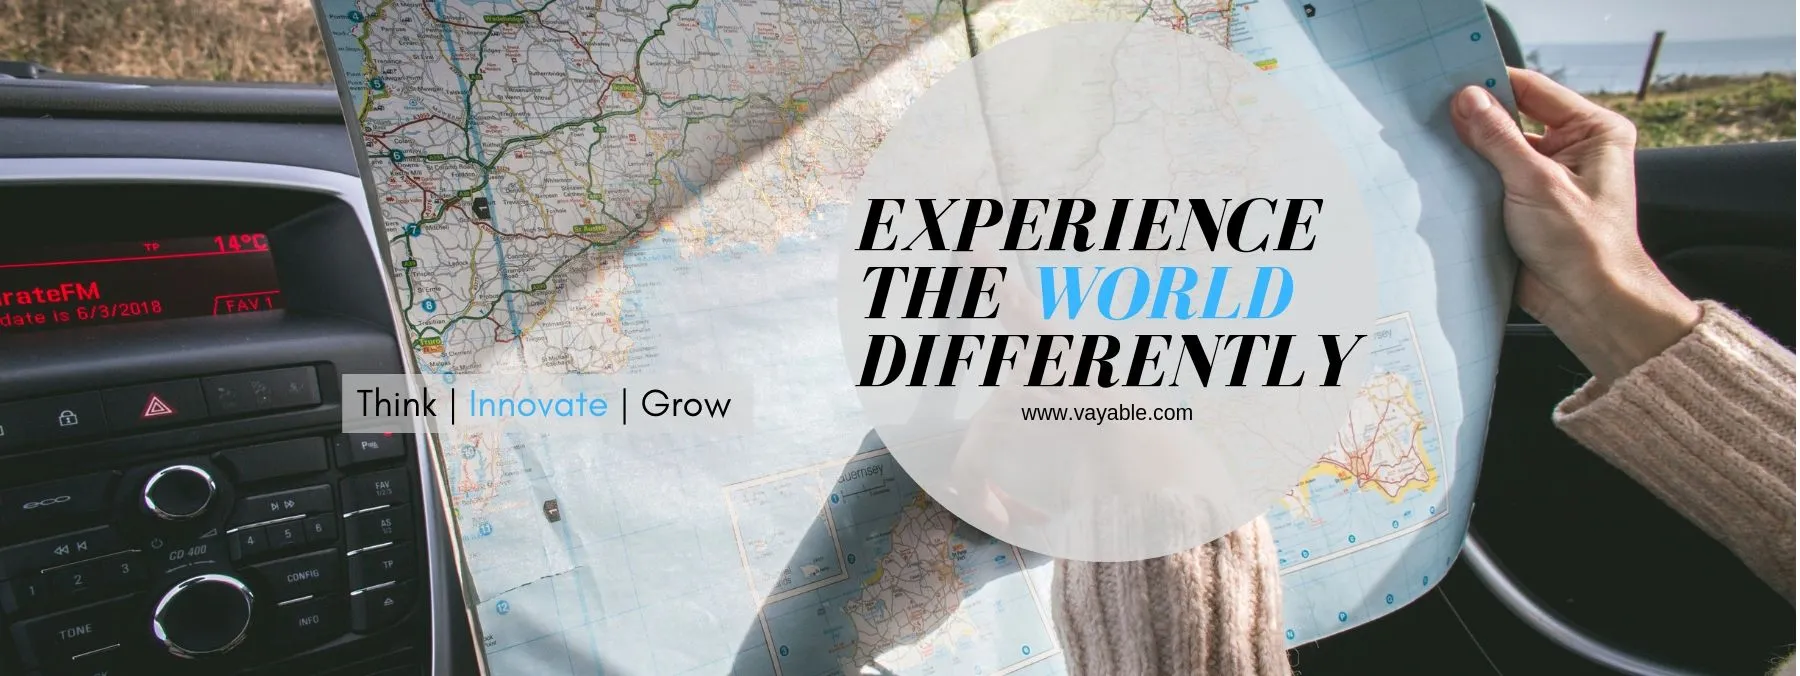 Experience the world differently with “Vayable”